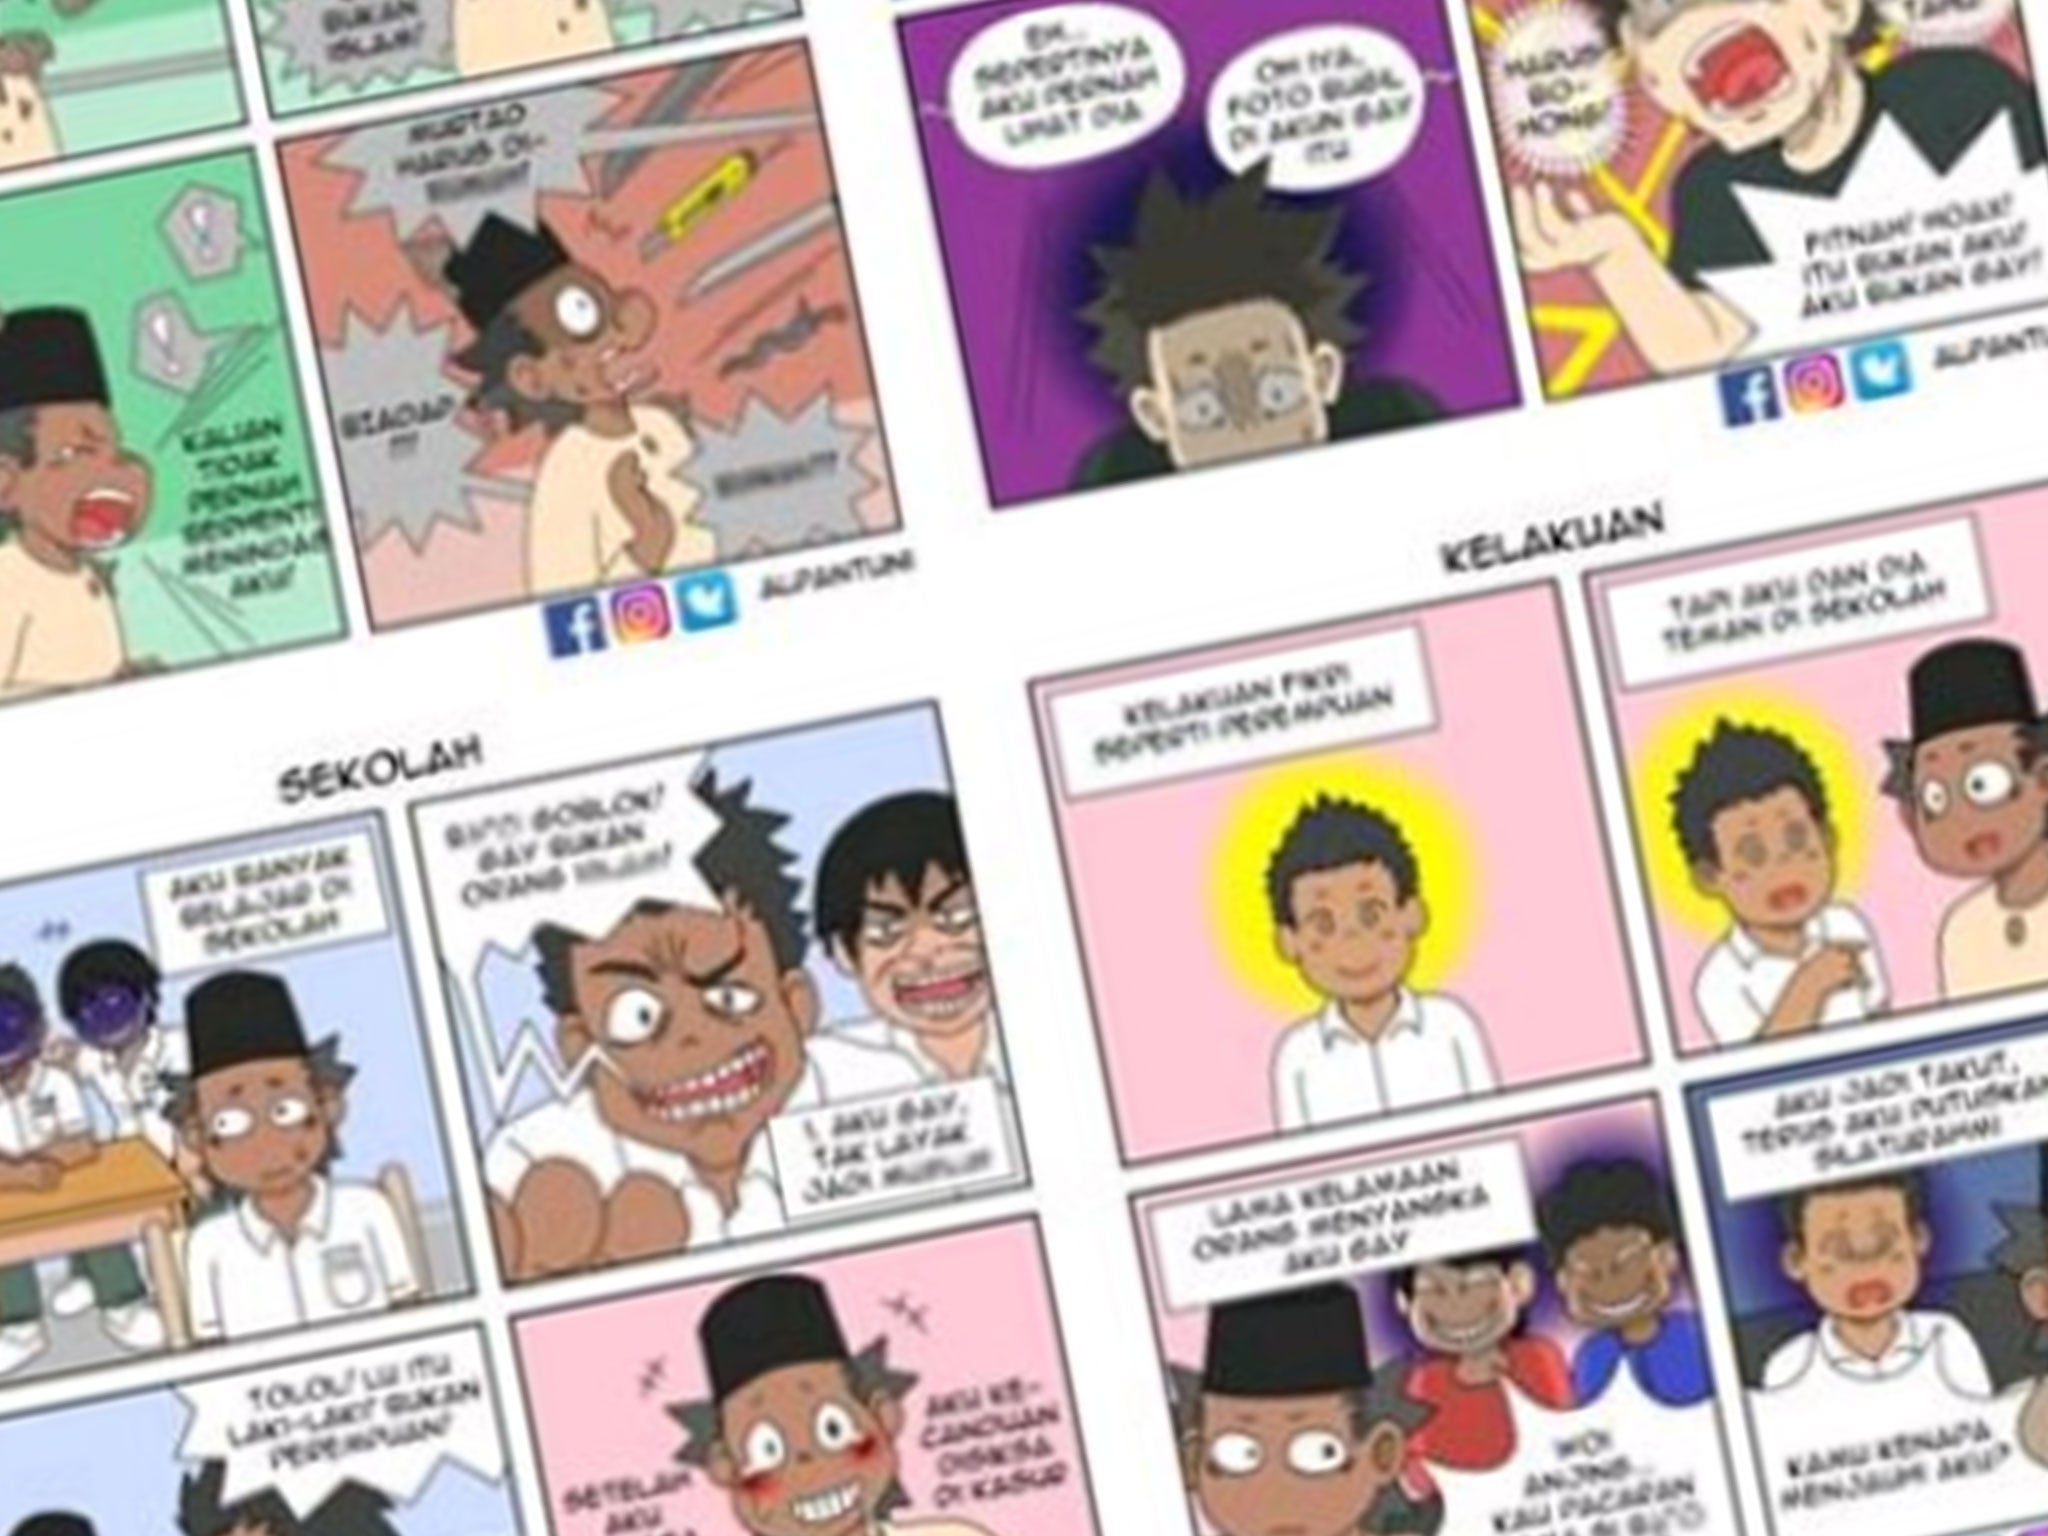 The comics depict gay characters facing discrimination and abuse, which has become increasingly common in Indonesia since late 2015